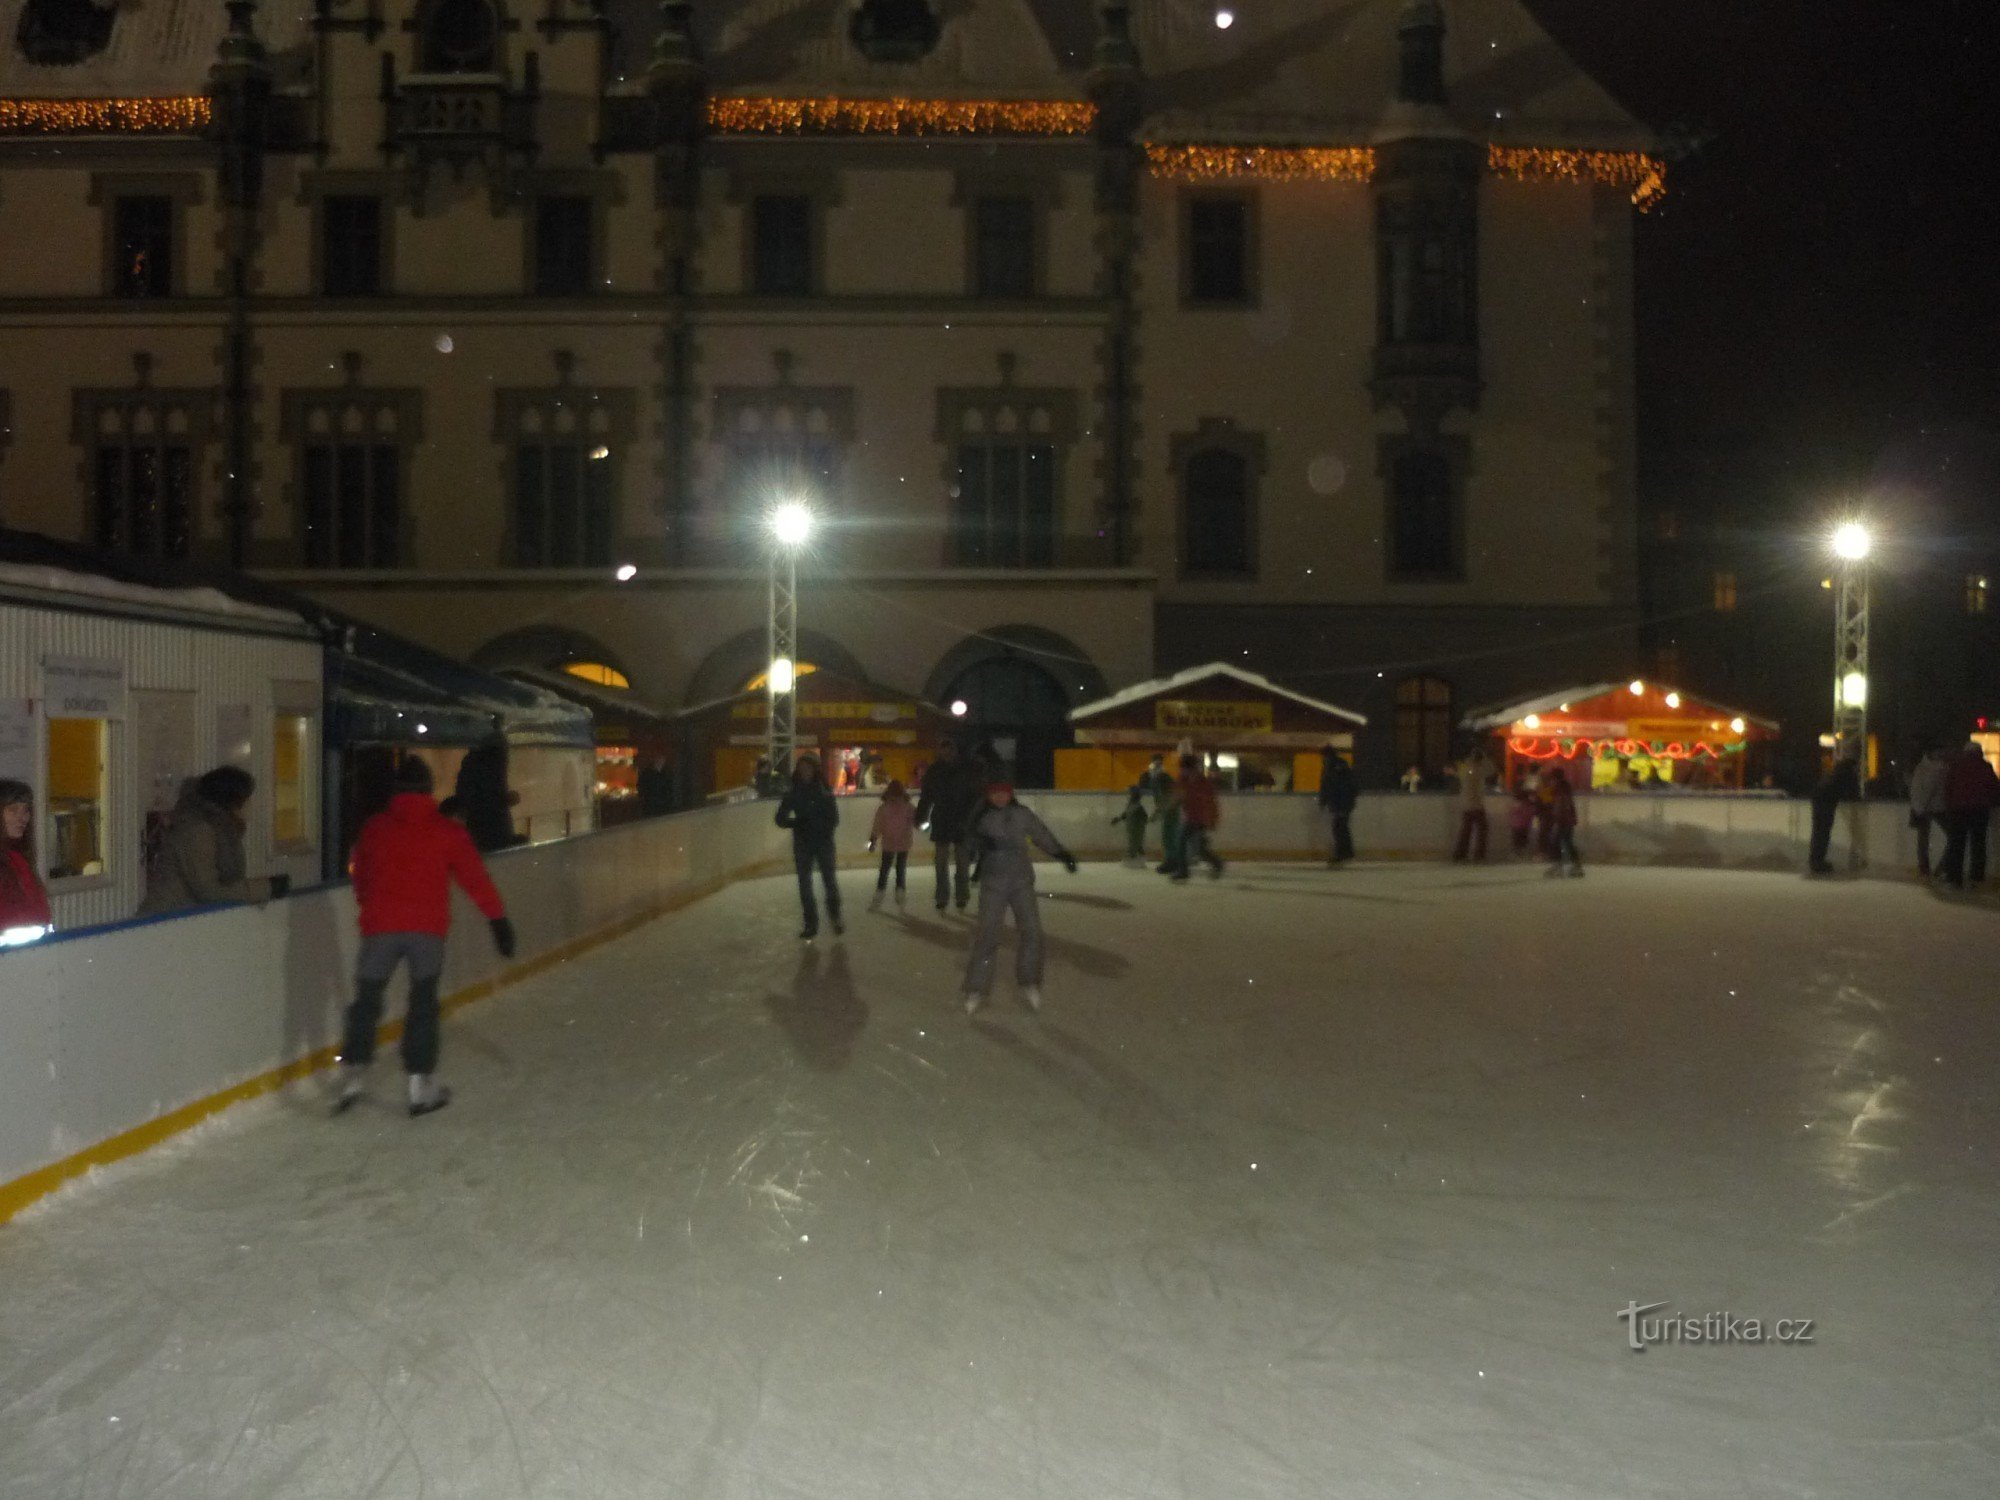 skating in front of the town hall in Olomouc